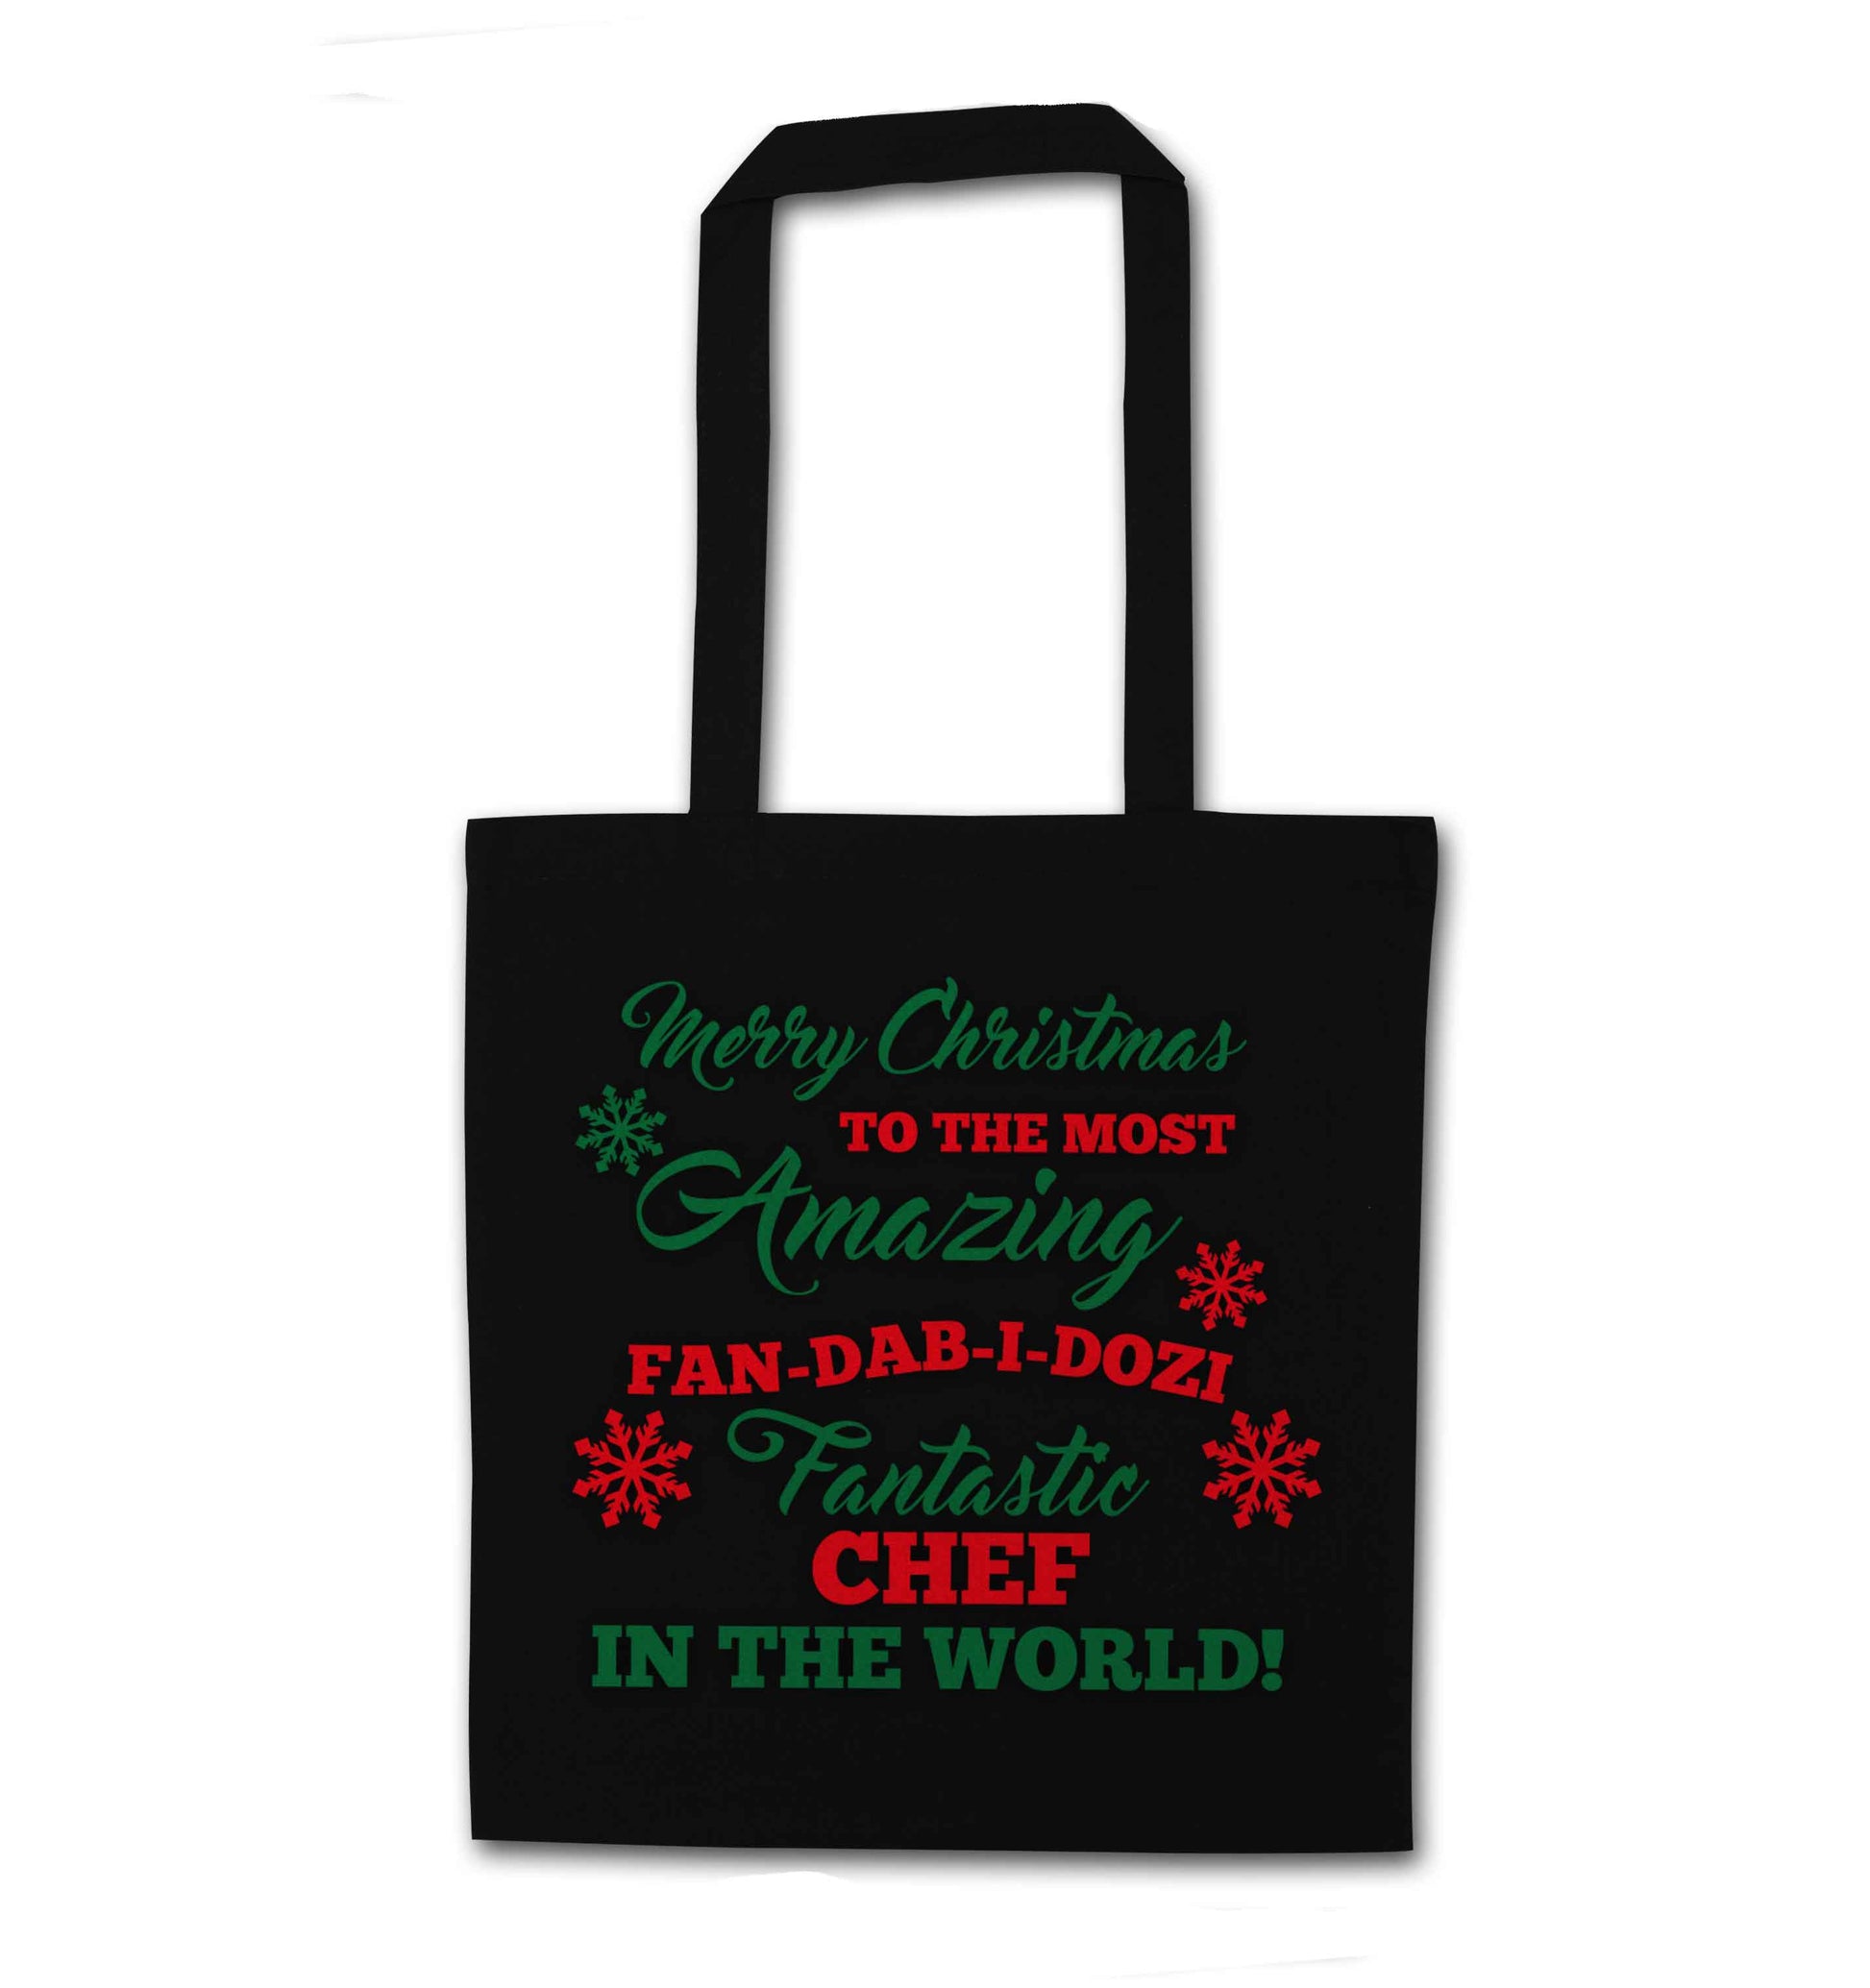 Merry Christmas to the most amazing fan-dab-i-dozi fantasic chef in the world black tote bag